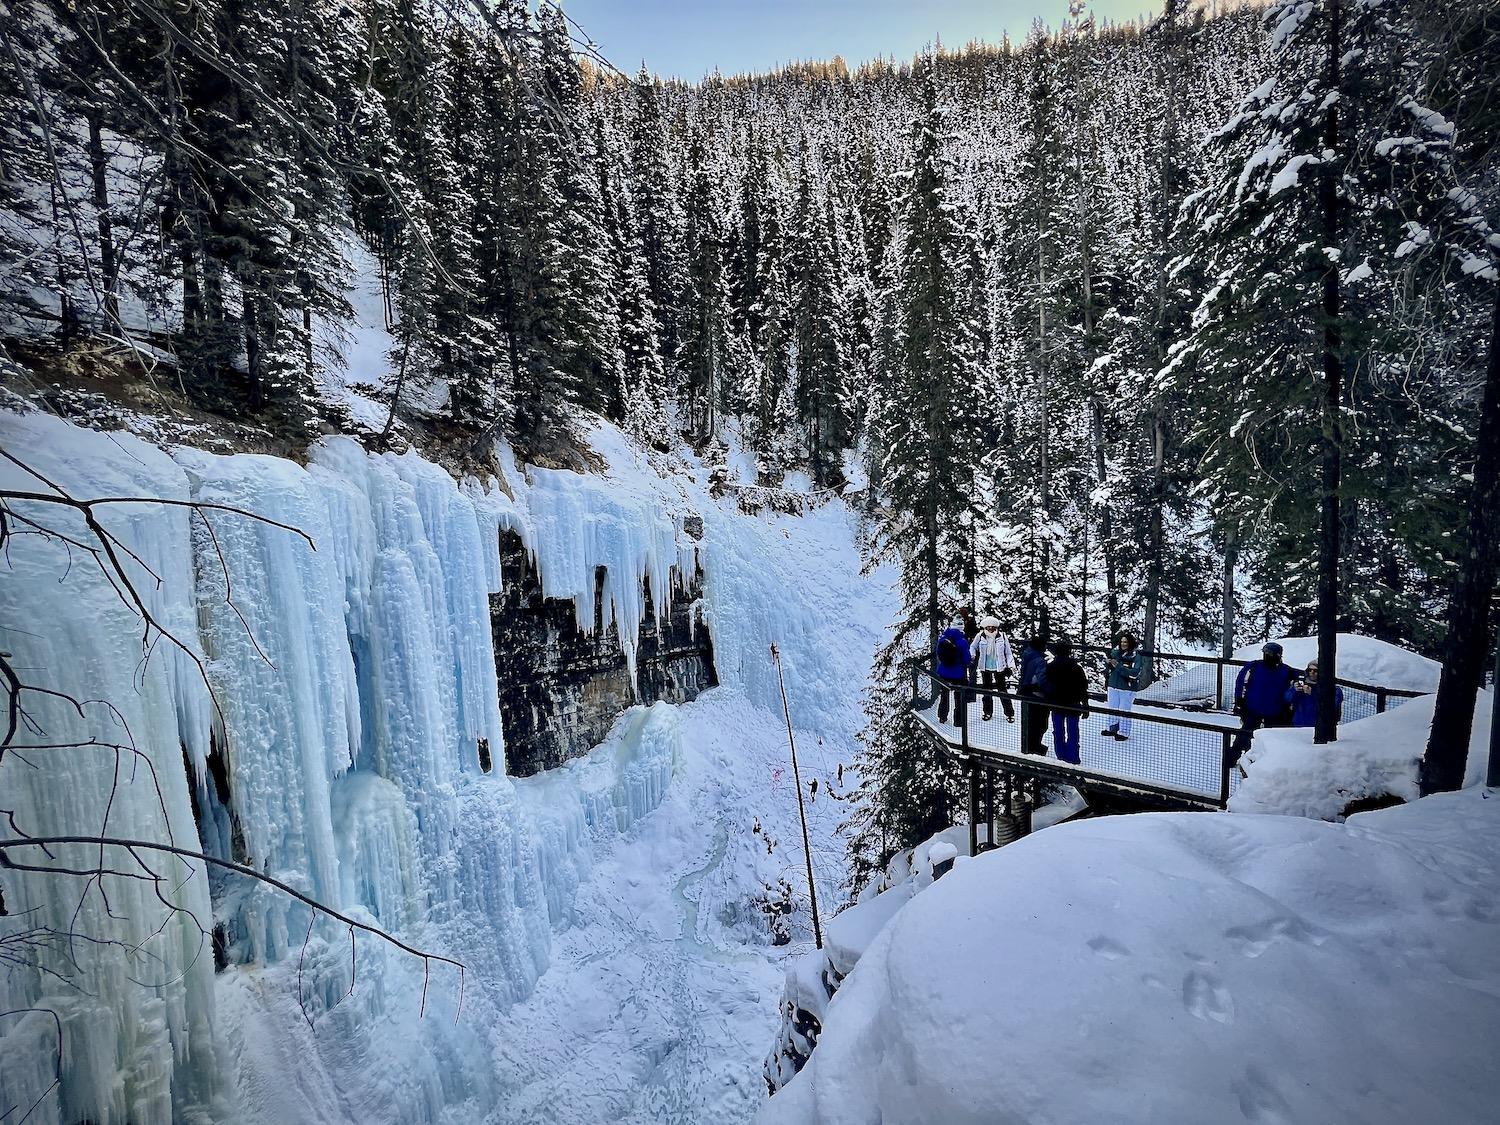 People gather on the viewing platform at Johnston Canyon's Upper Falls.